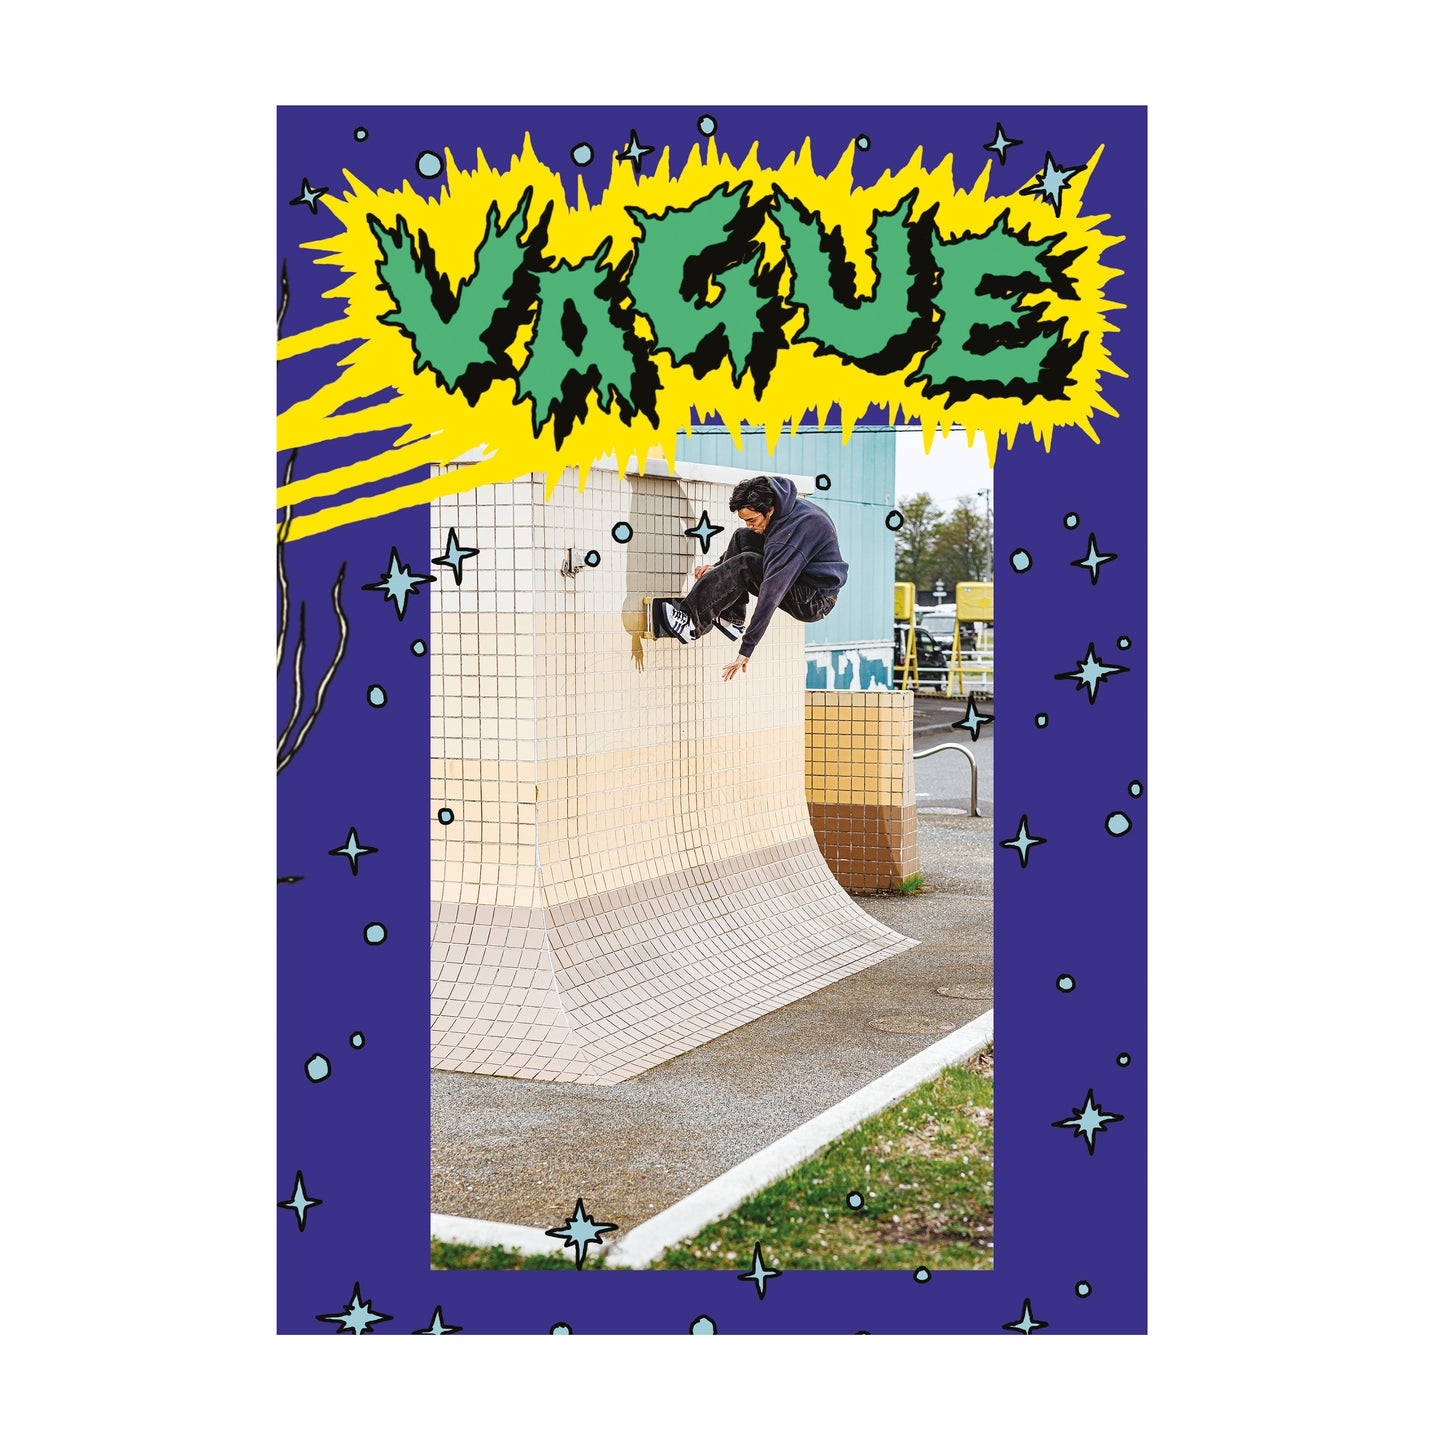 Vague Issue 37